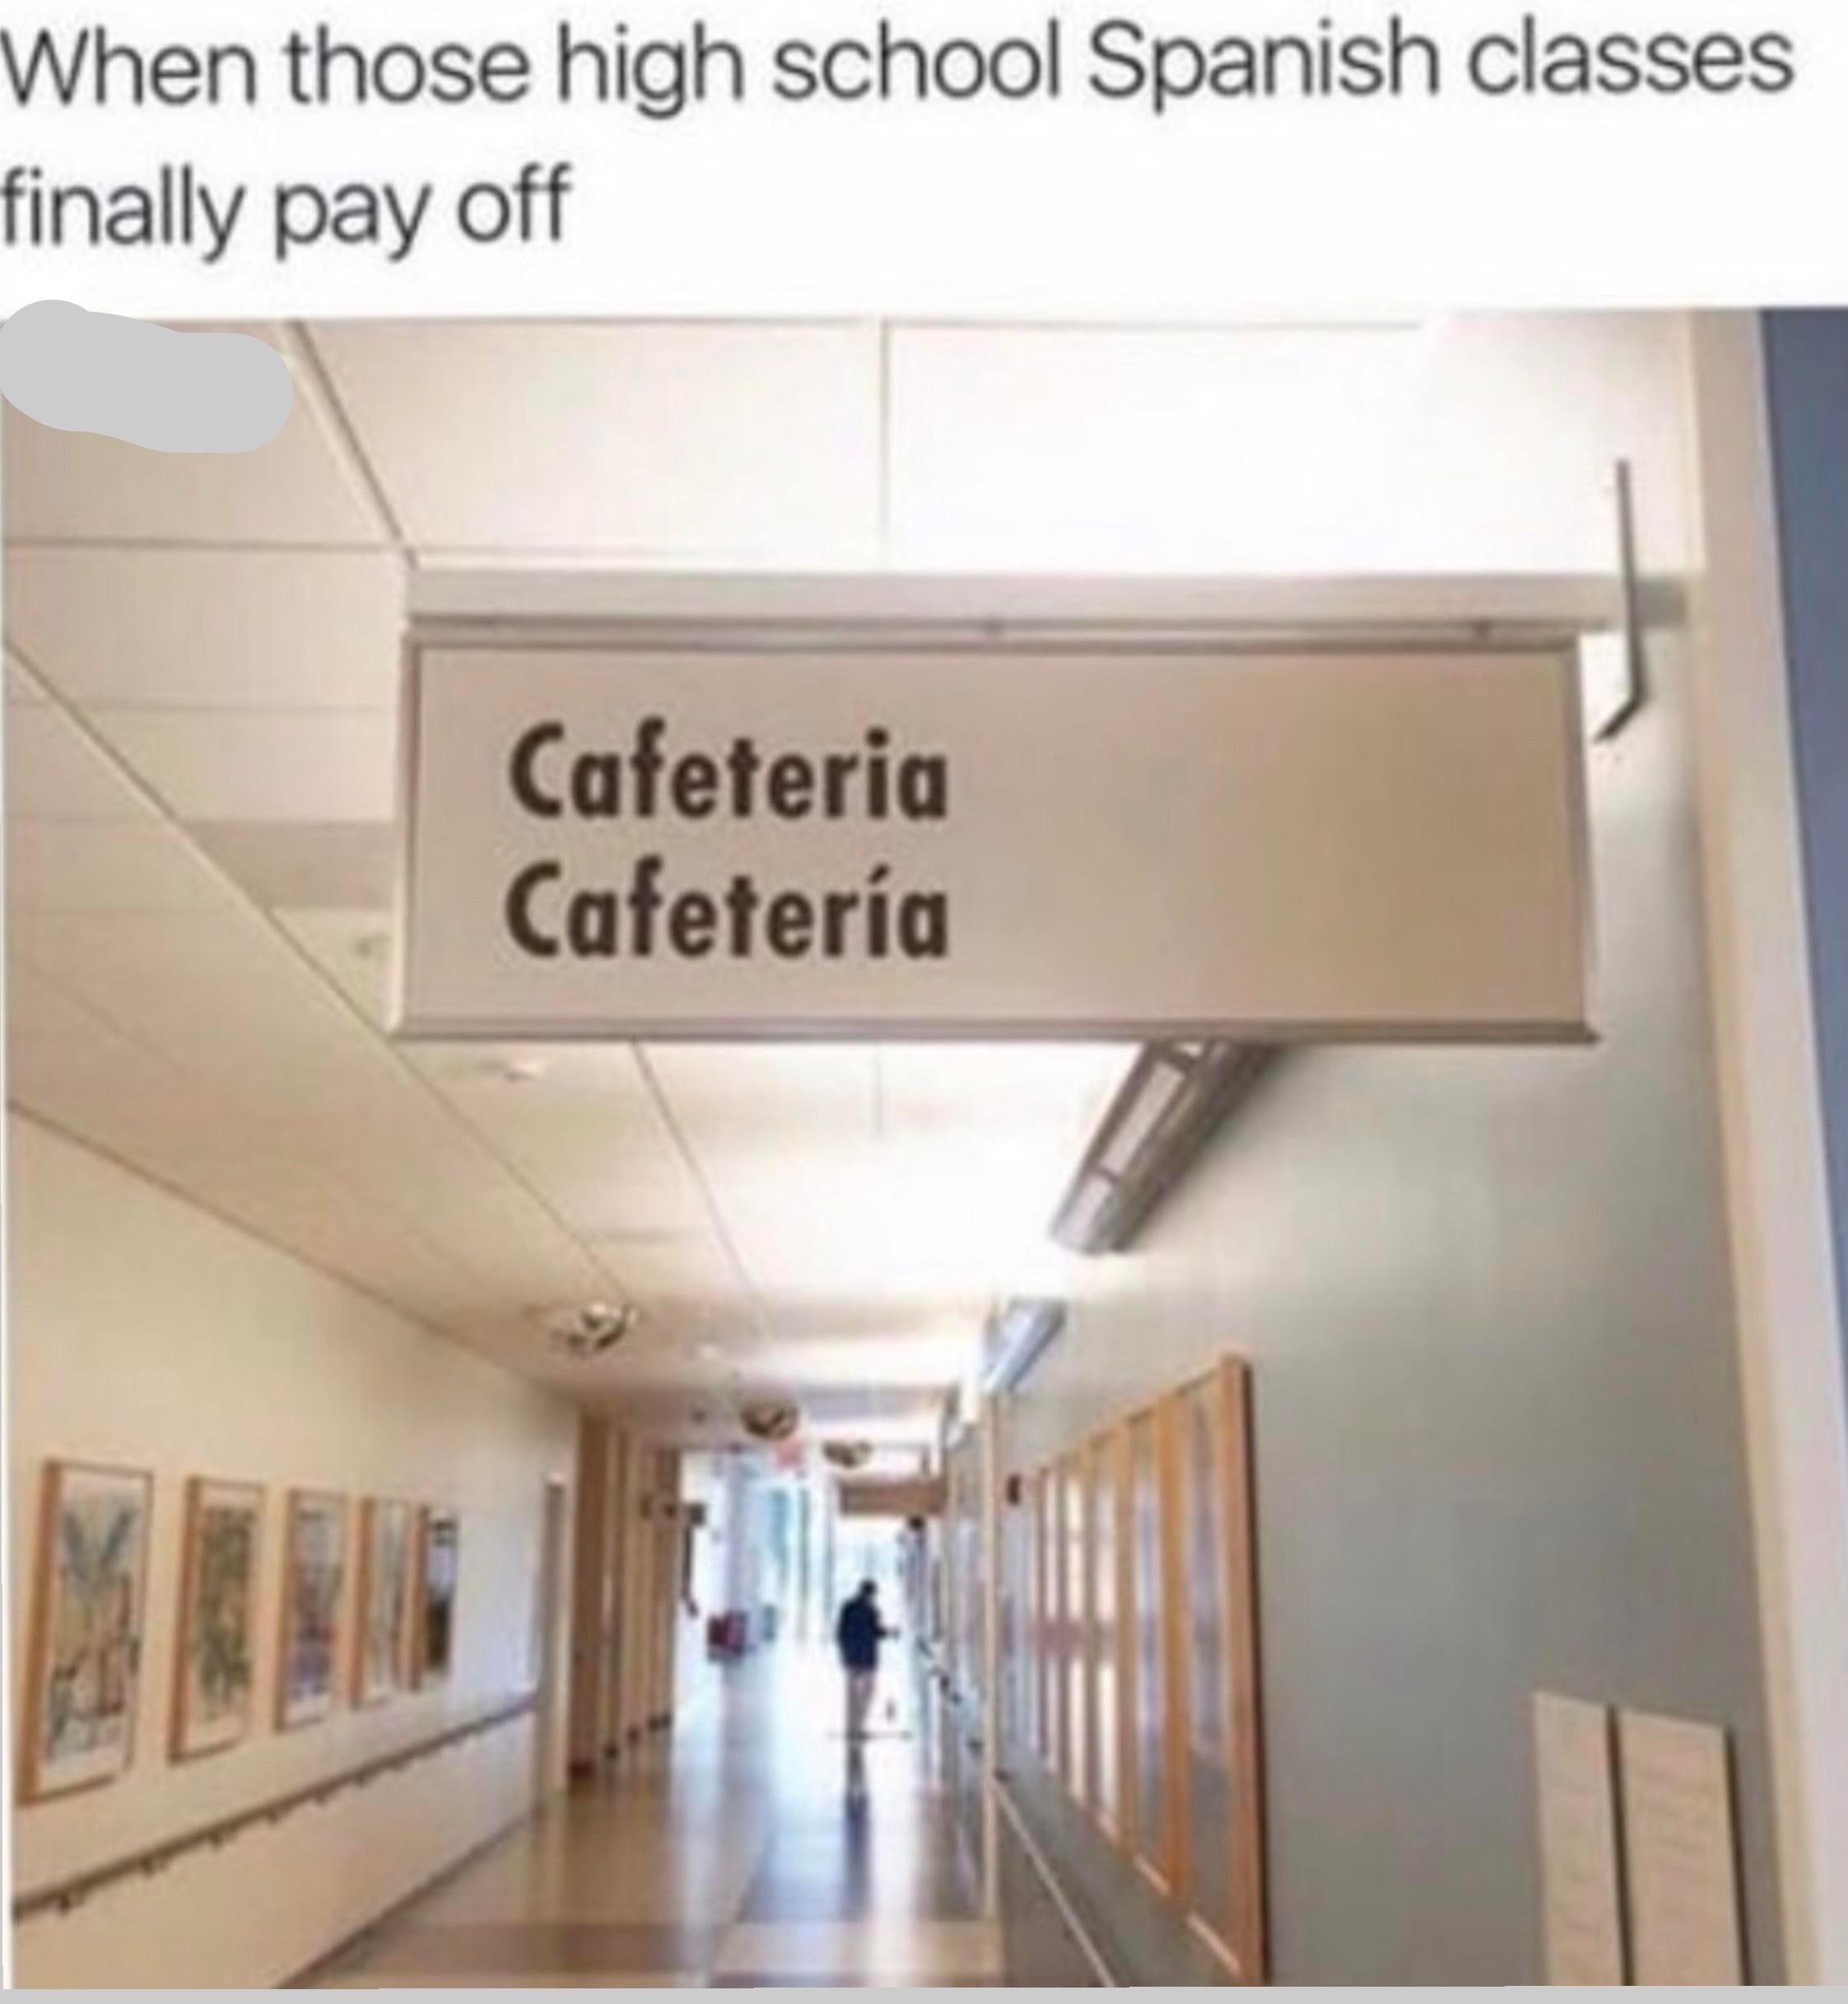 funny spanish memes for school - When those high school Spanish classes finally pay off Cafeteria Cafetera